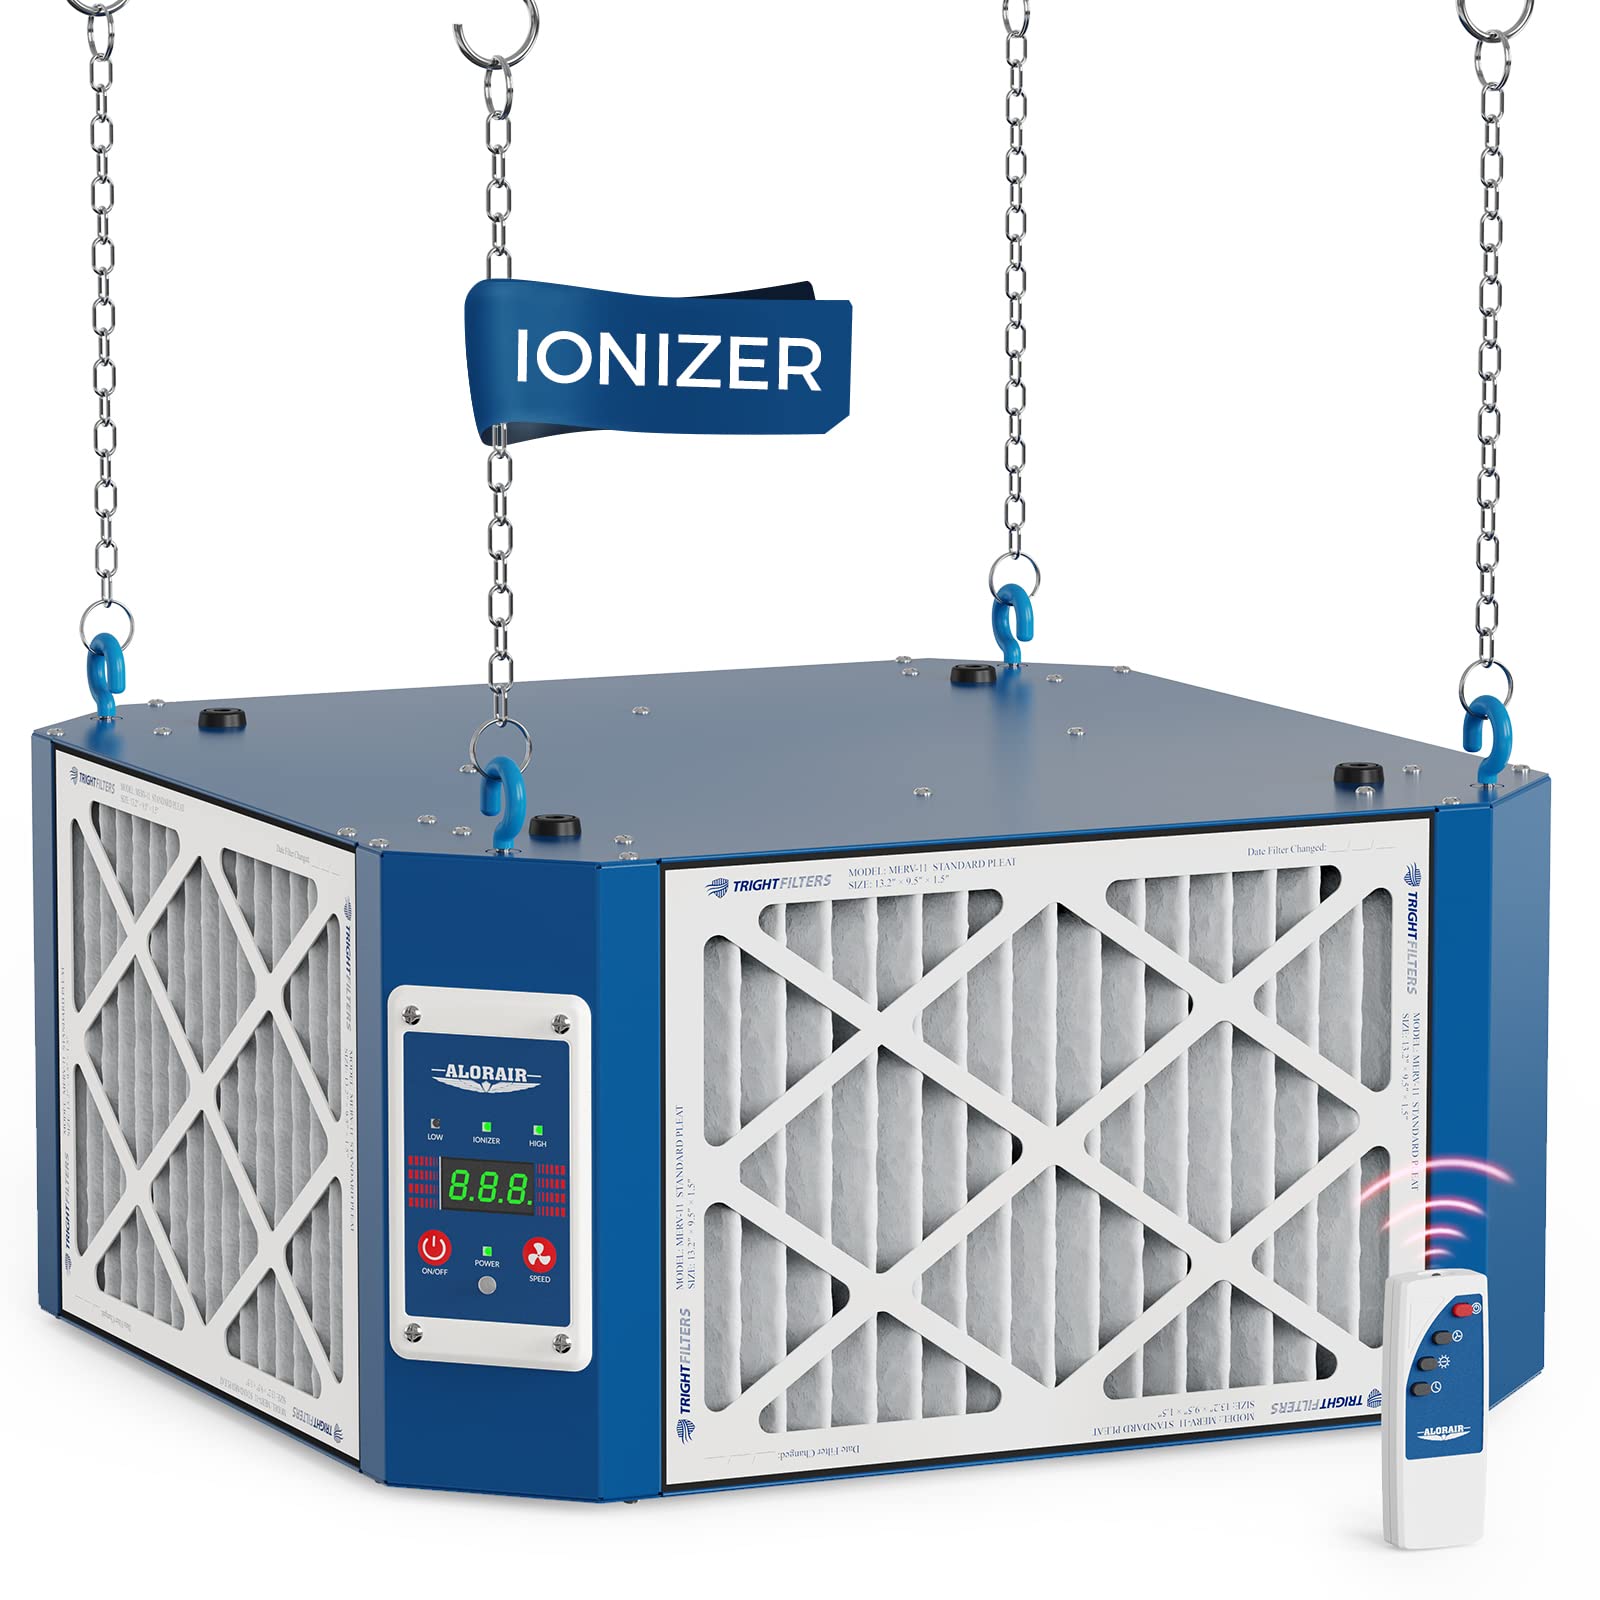 AlorAir 360 degree Intake Air Filtration System - 1350 CFM with Strong Vortex Fan Built-in Ionizer Shop Dust Collector fo